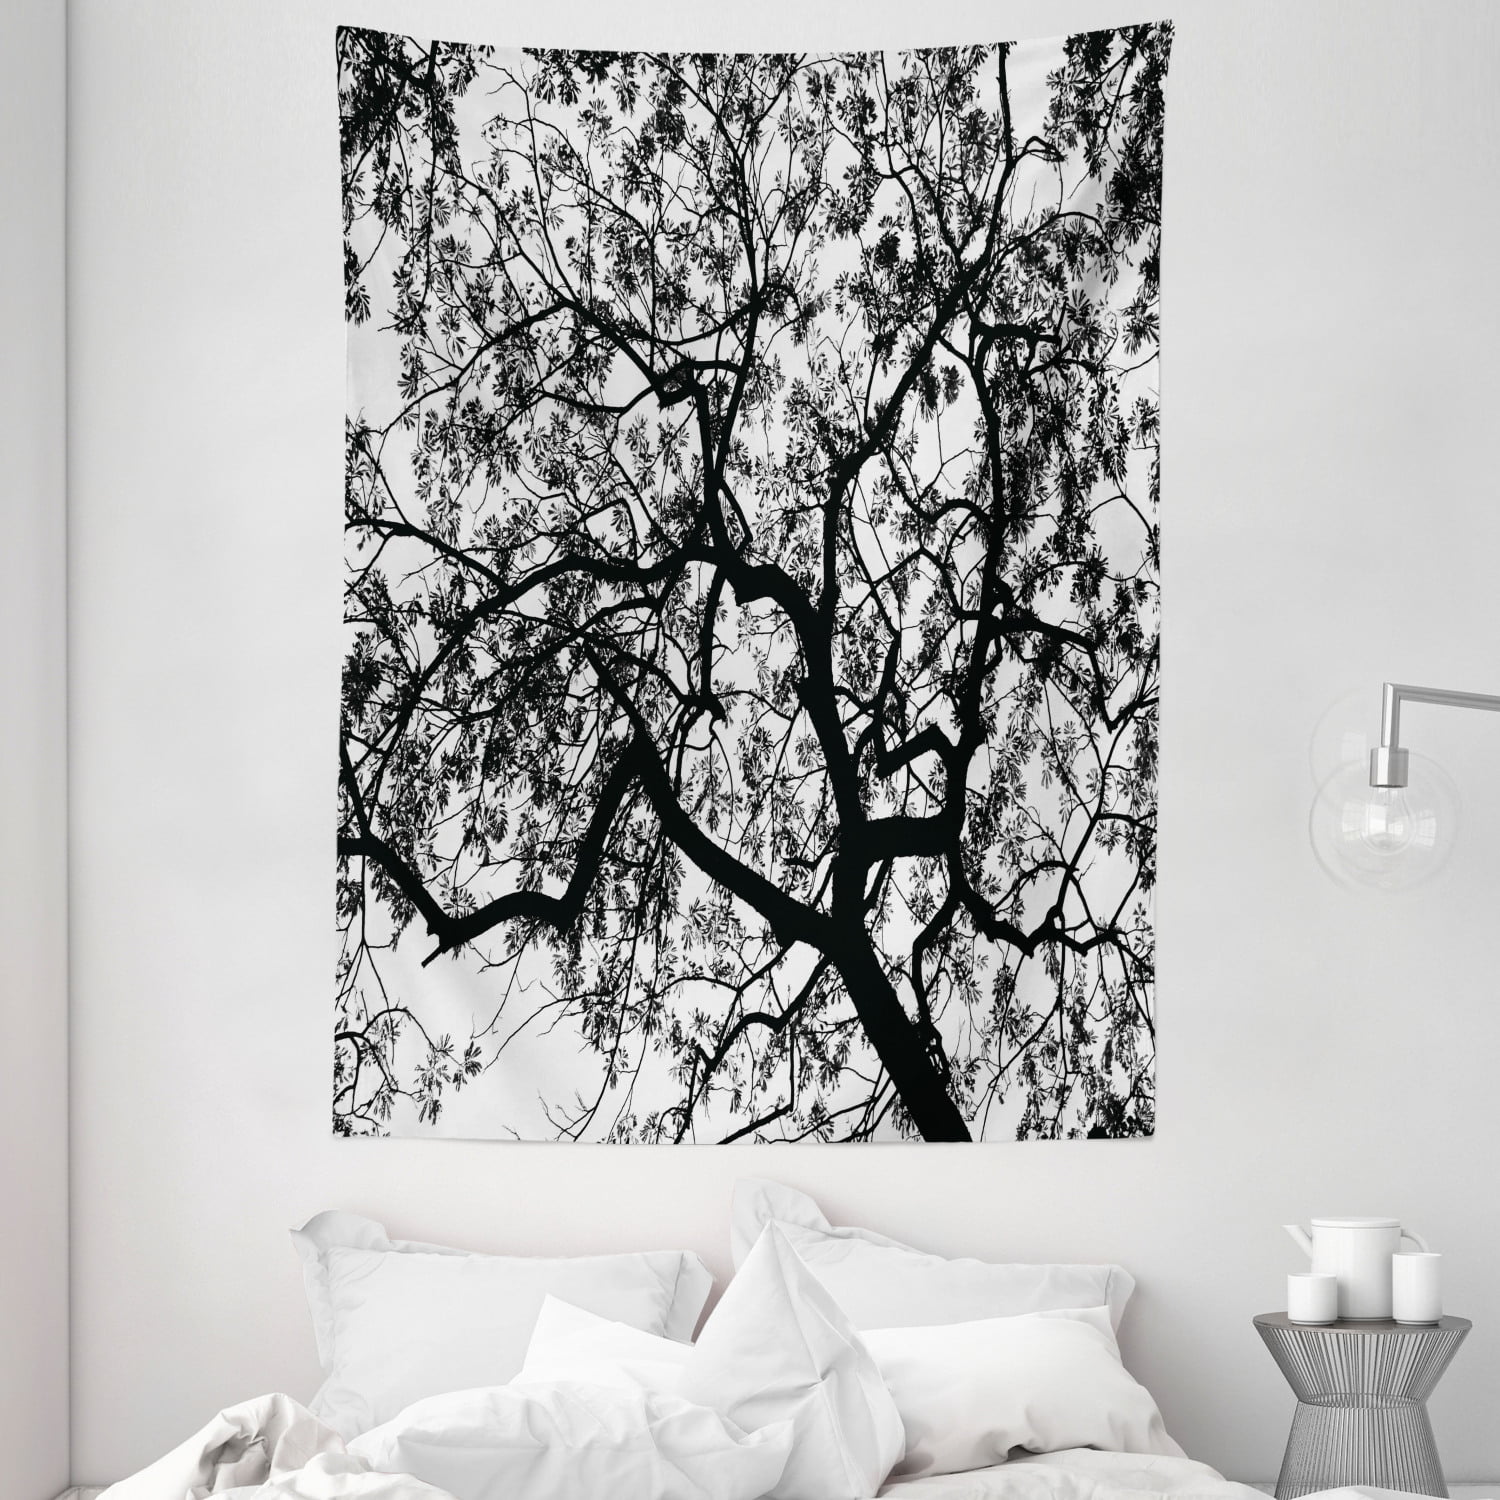 Forest Tree Theme Tapestry Wall Hanging Living Room Bedroom Dorm Decor 